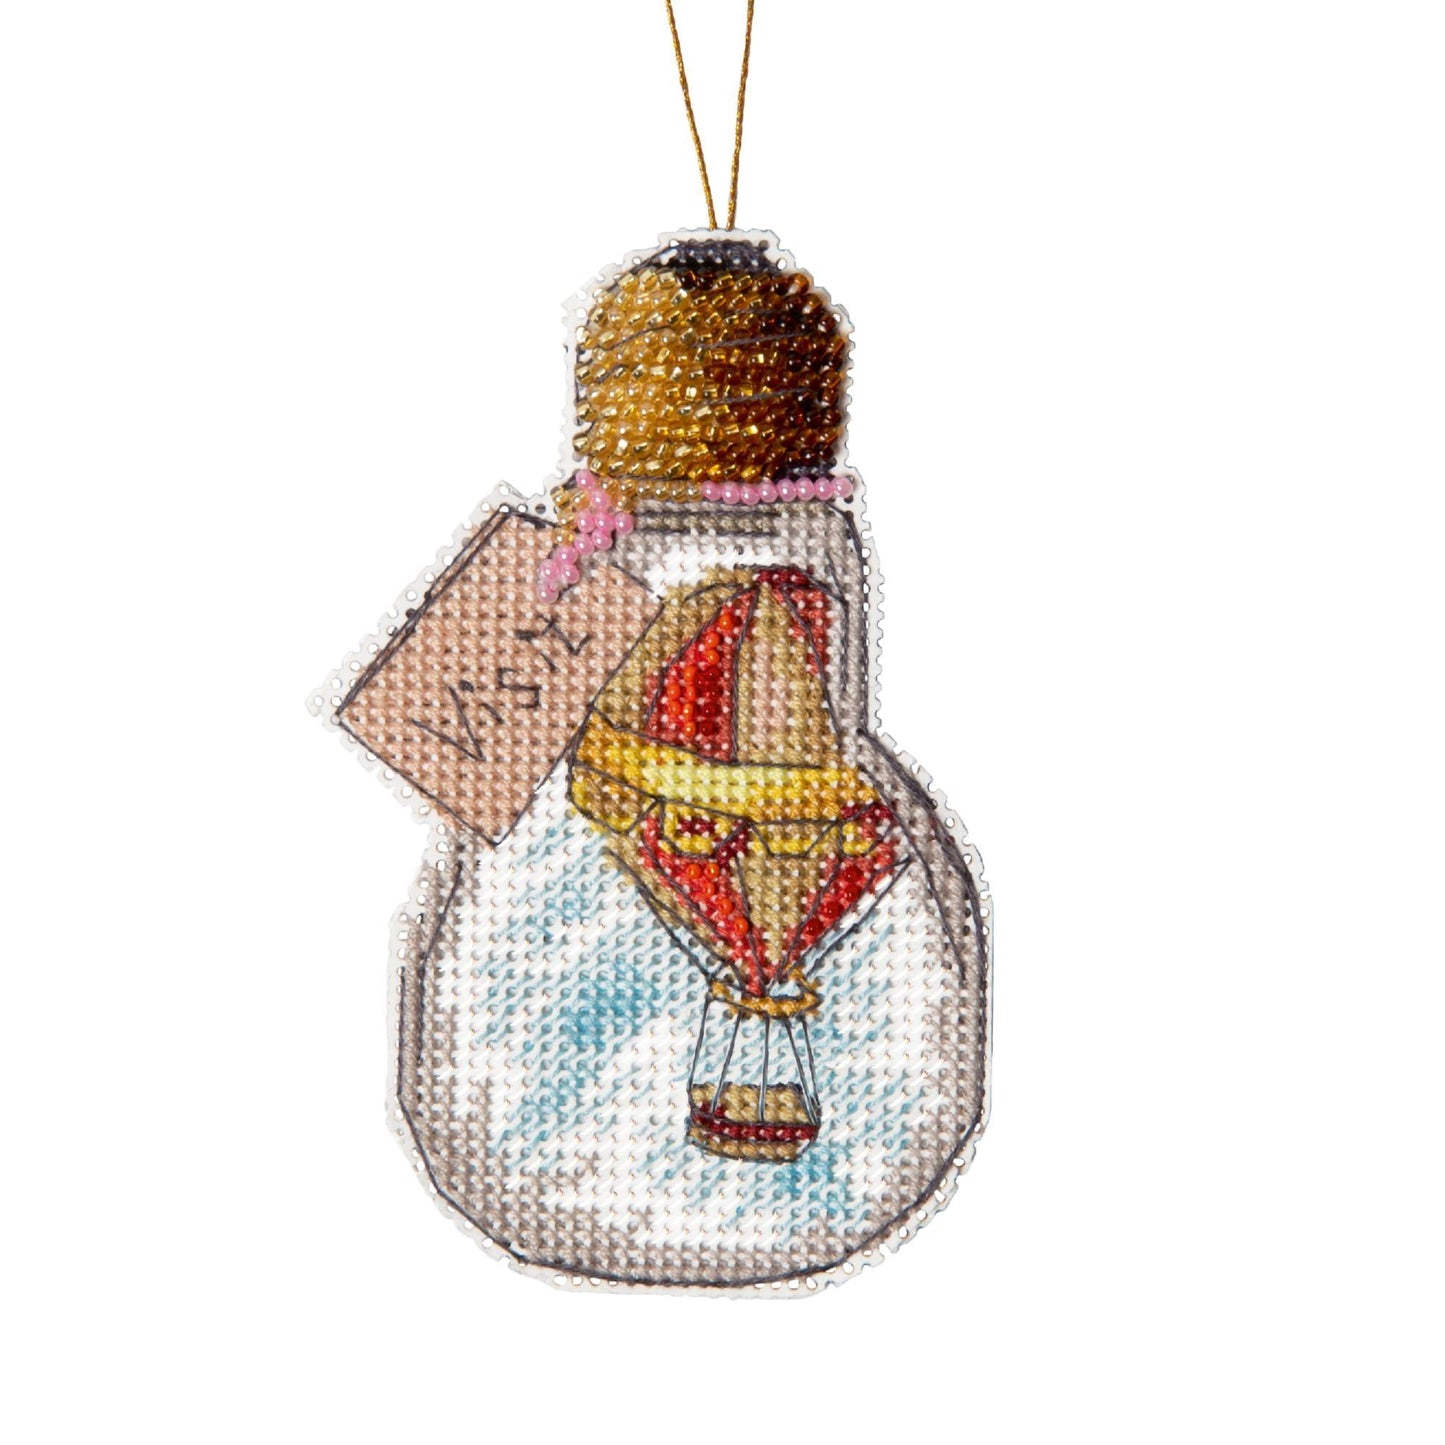 VISIT "Travel series", Counted Cross-Stitch Kit, 14 count plastic canvas, size 6 x 11 cm, CRYSTAL ART (T-83)